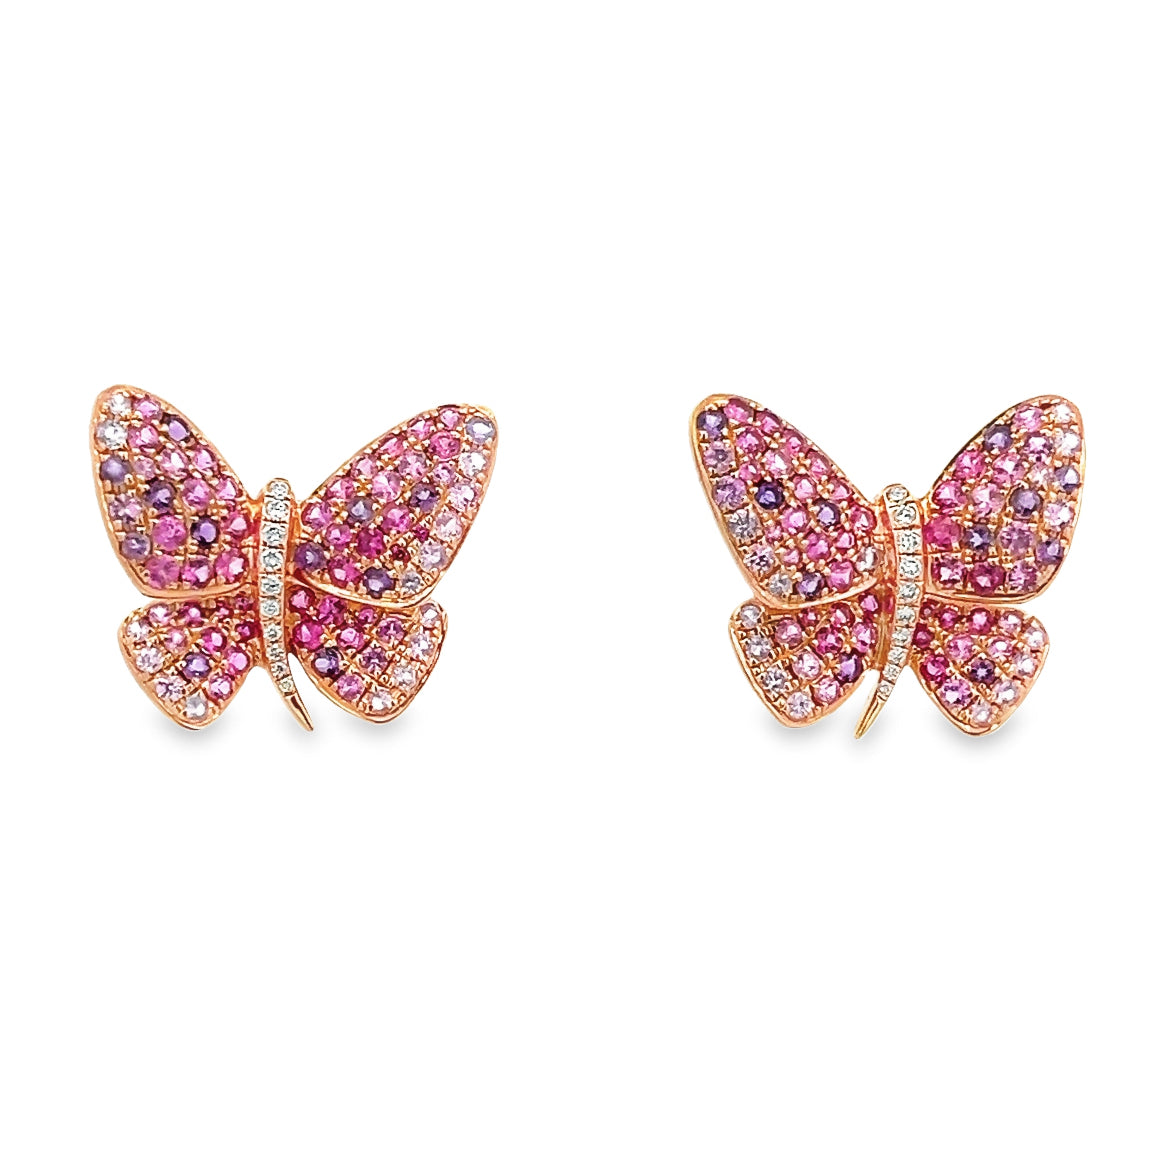 18K ROSE GOLD BUTTERFLY EARRINGS WITH PINK SAPPHIRE